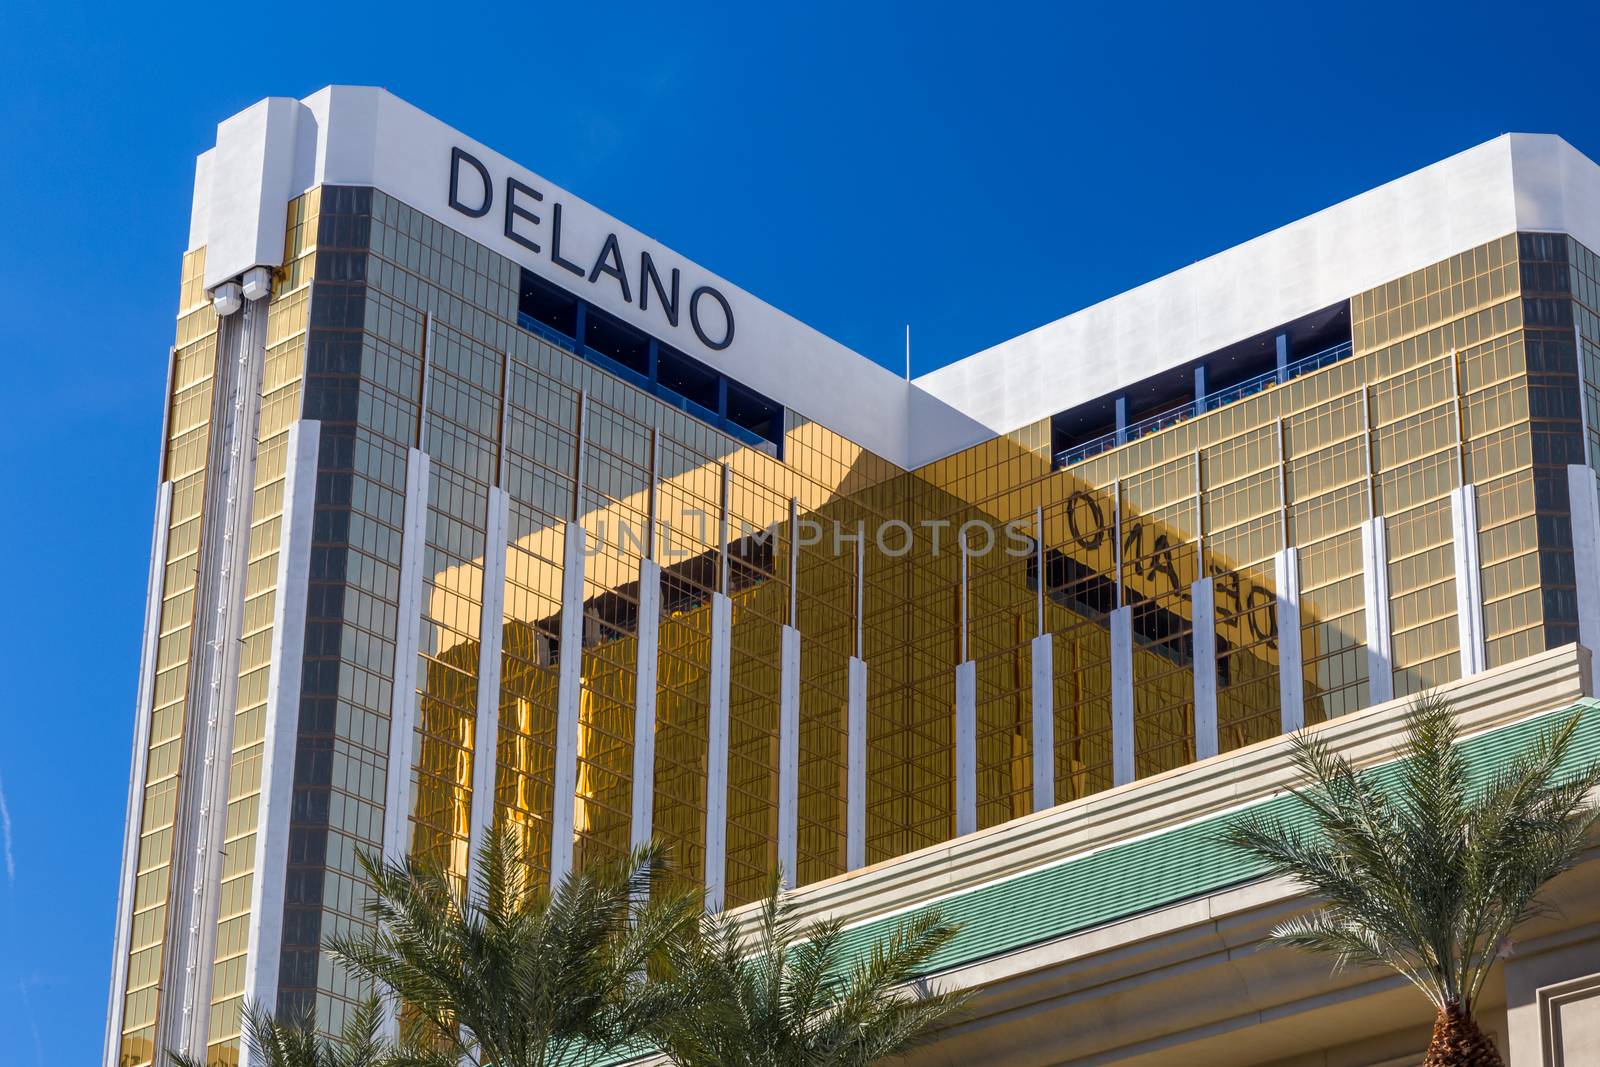 Delano Las Vegas Hotel and Casino by wolterk